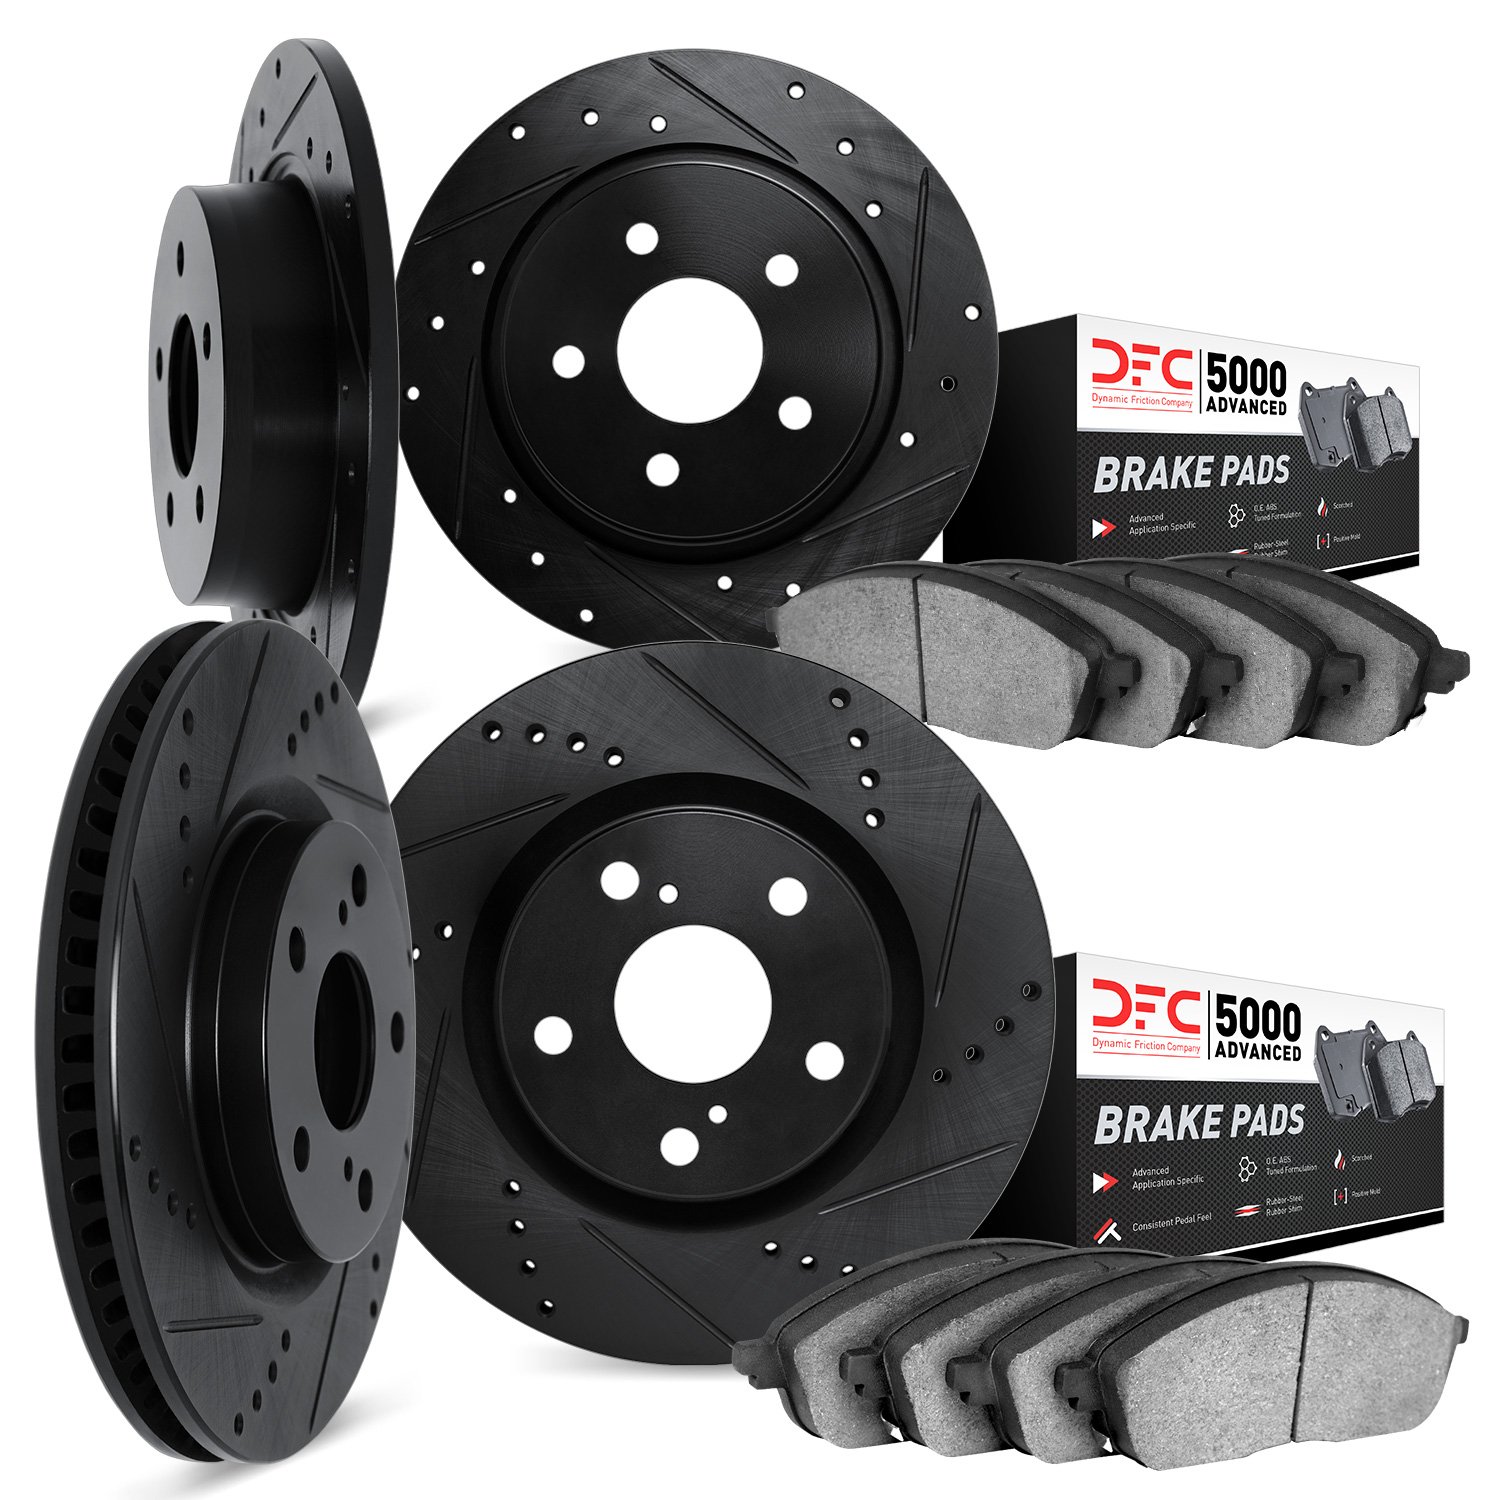 8504-59051 Drilled/Slotted Brake Rotors w/5000 Advanced Brake Pads Kit [Black], 2015-2017 Acura/Honda, Position: Front and Rear